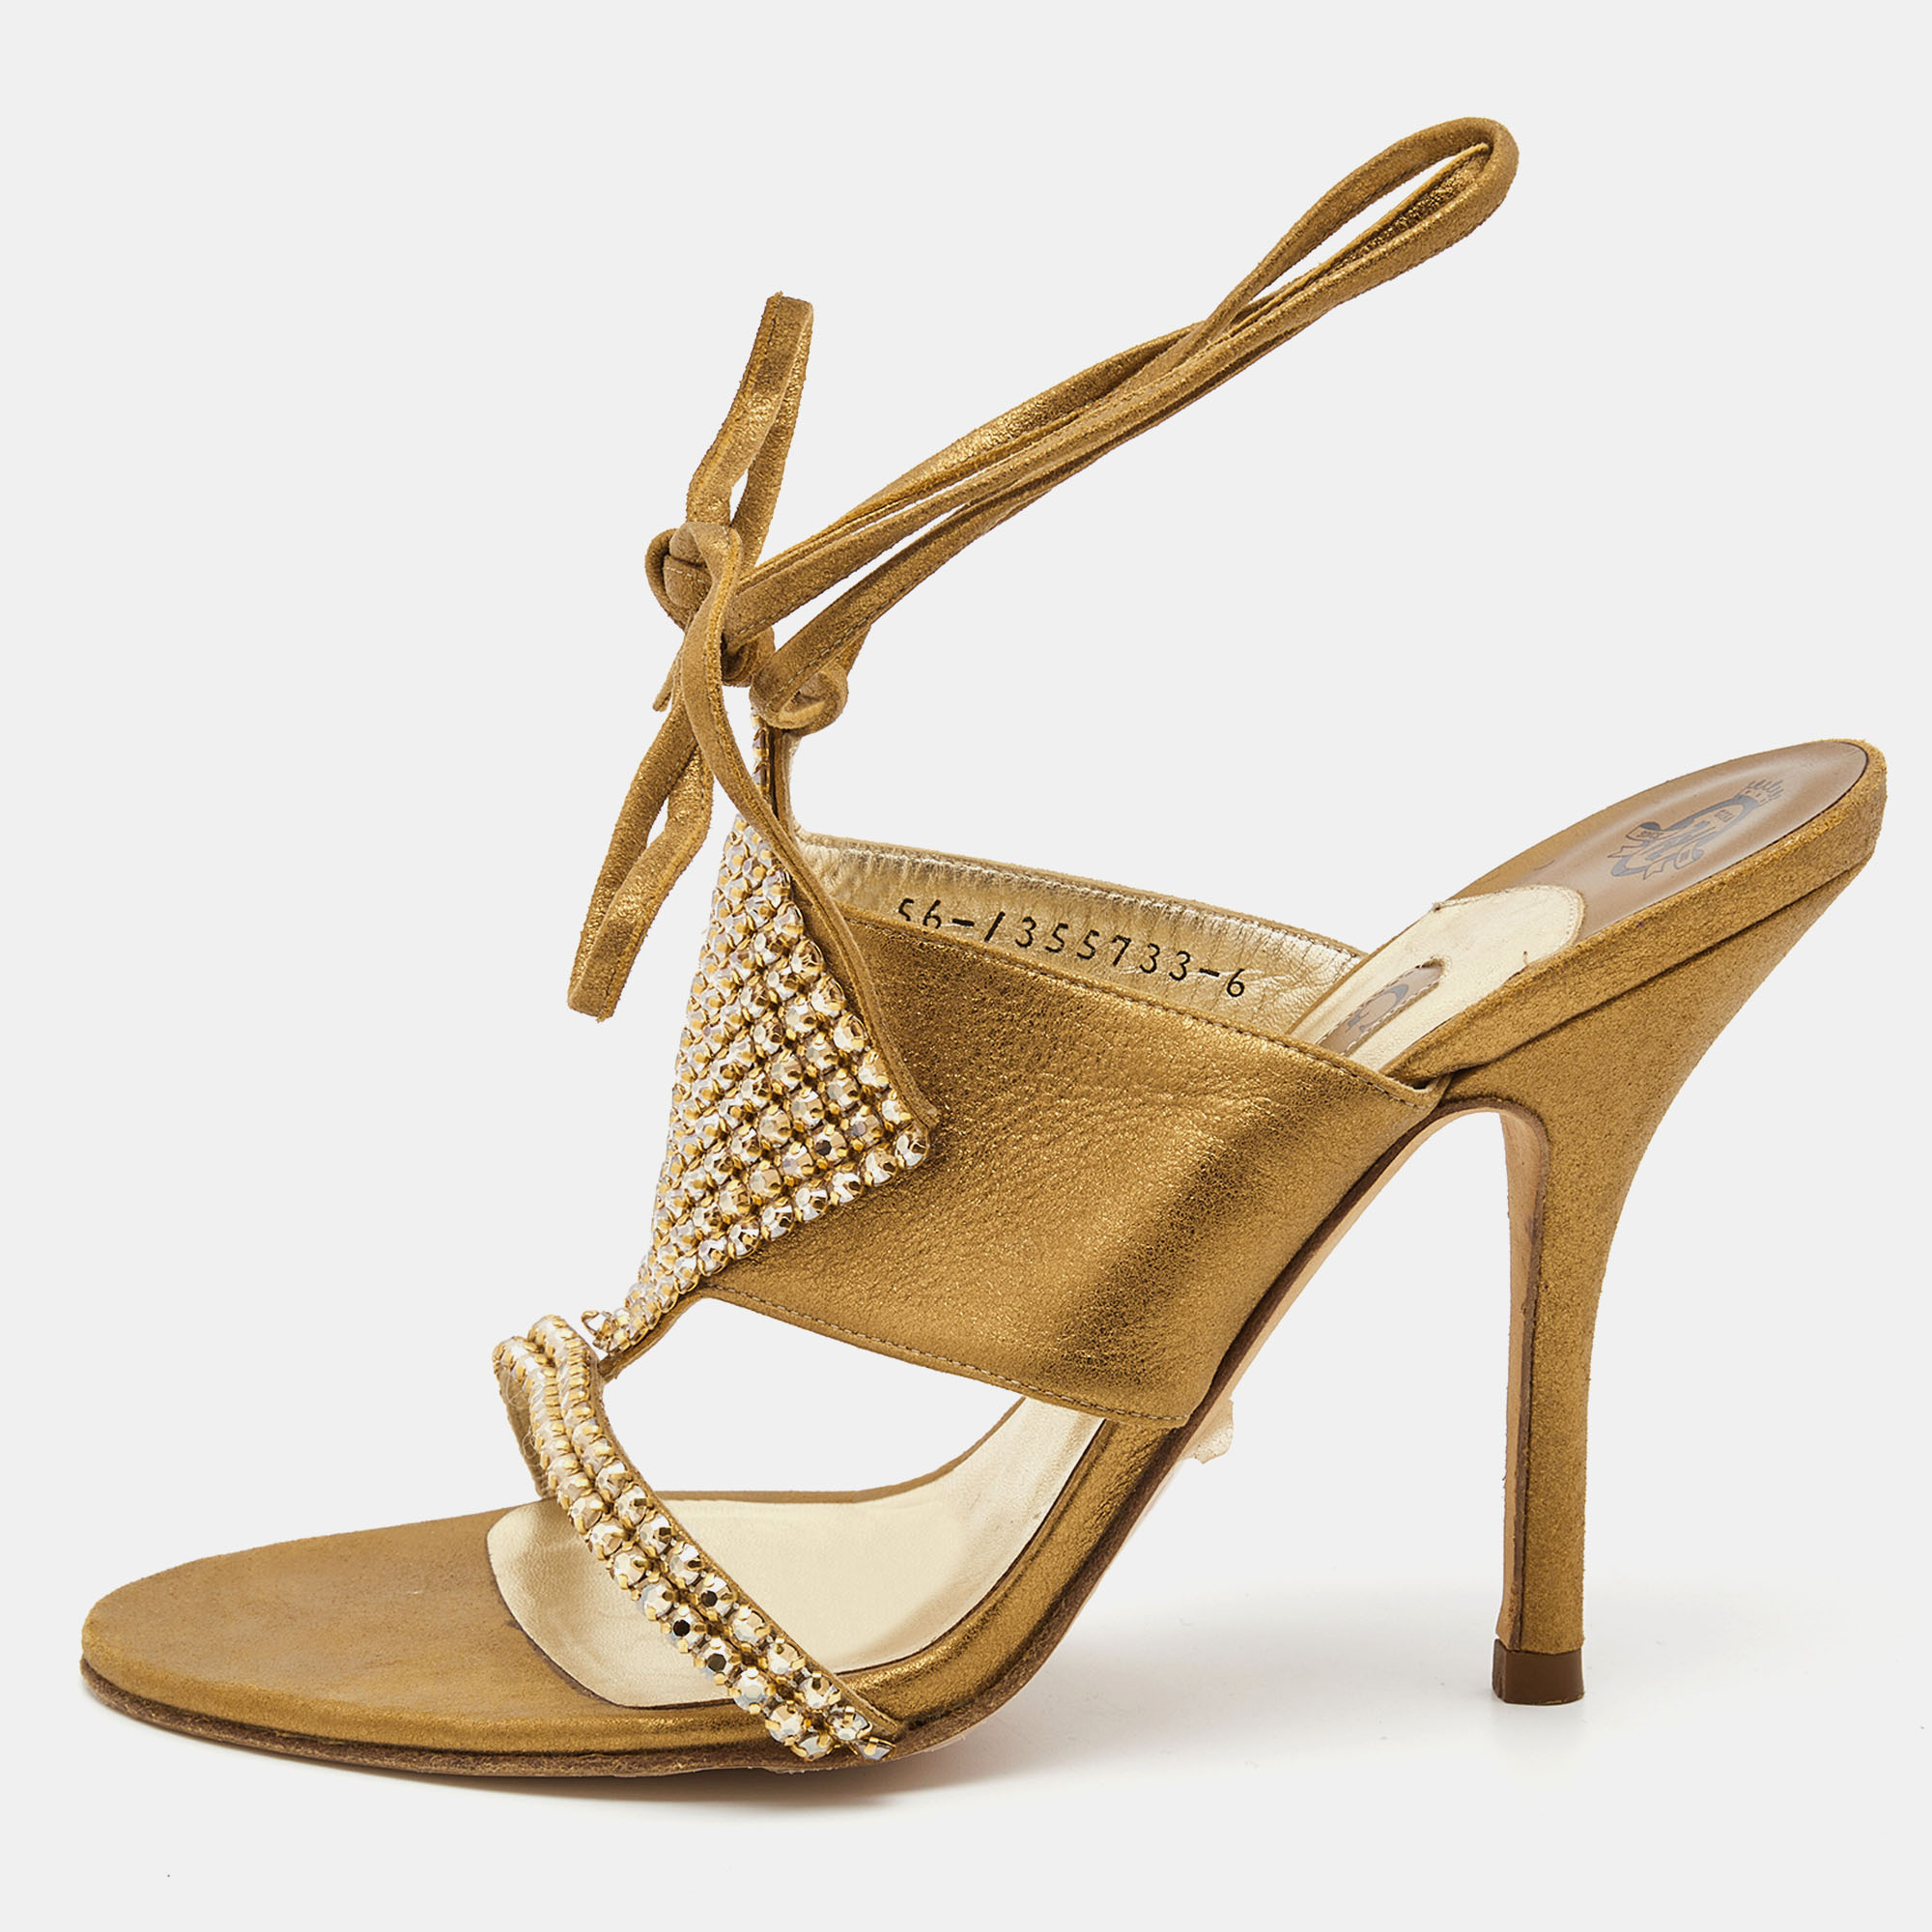 Gina Metallic Gold Leather Crystal Embellished Ankle Wrap Sandals Size 39